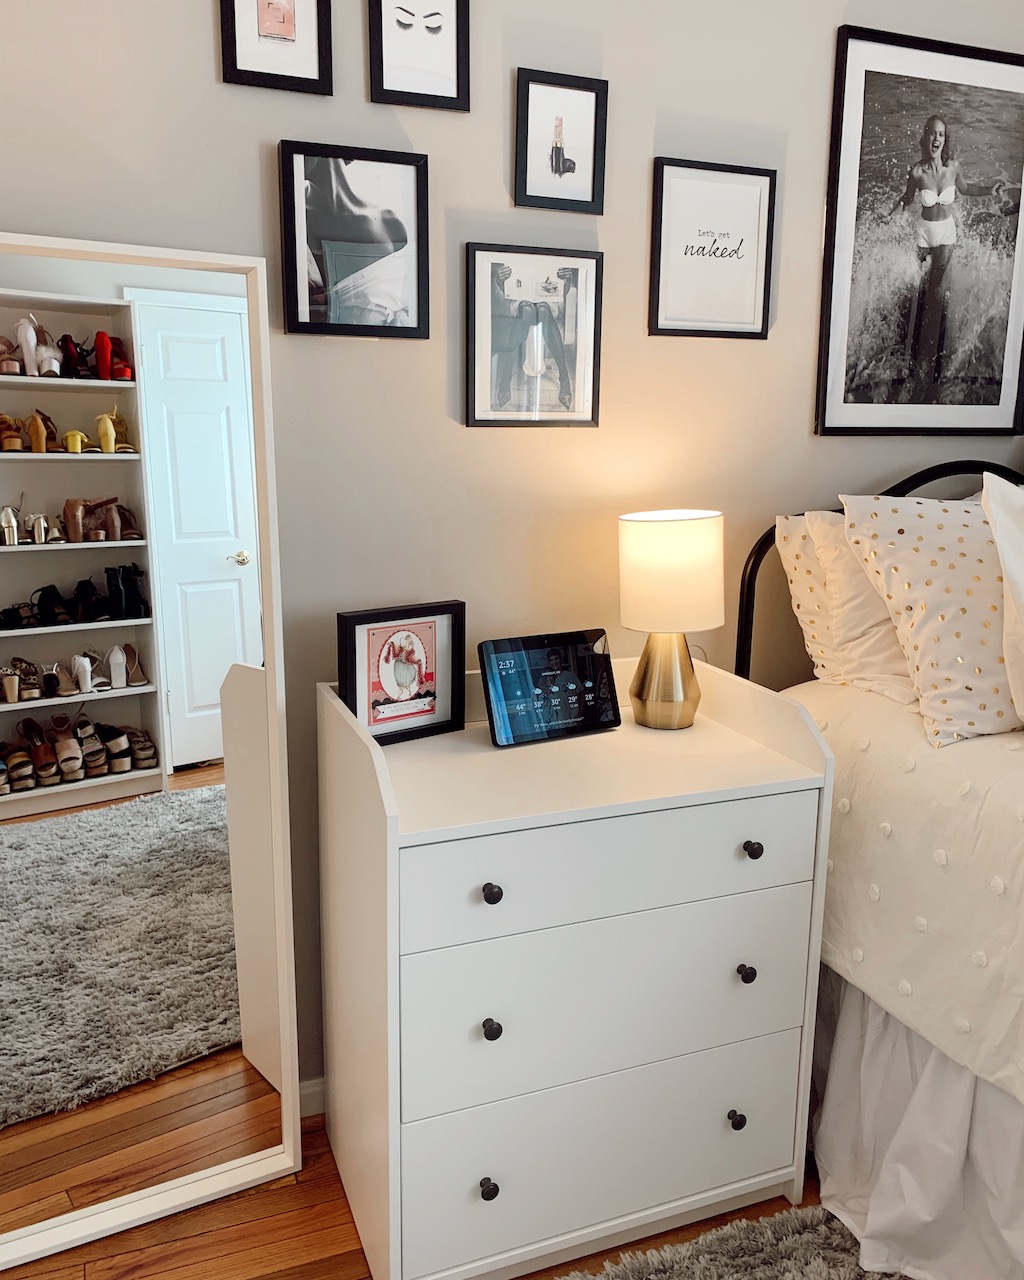 Extreme Bedroom Makeover With IKEA